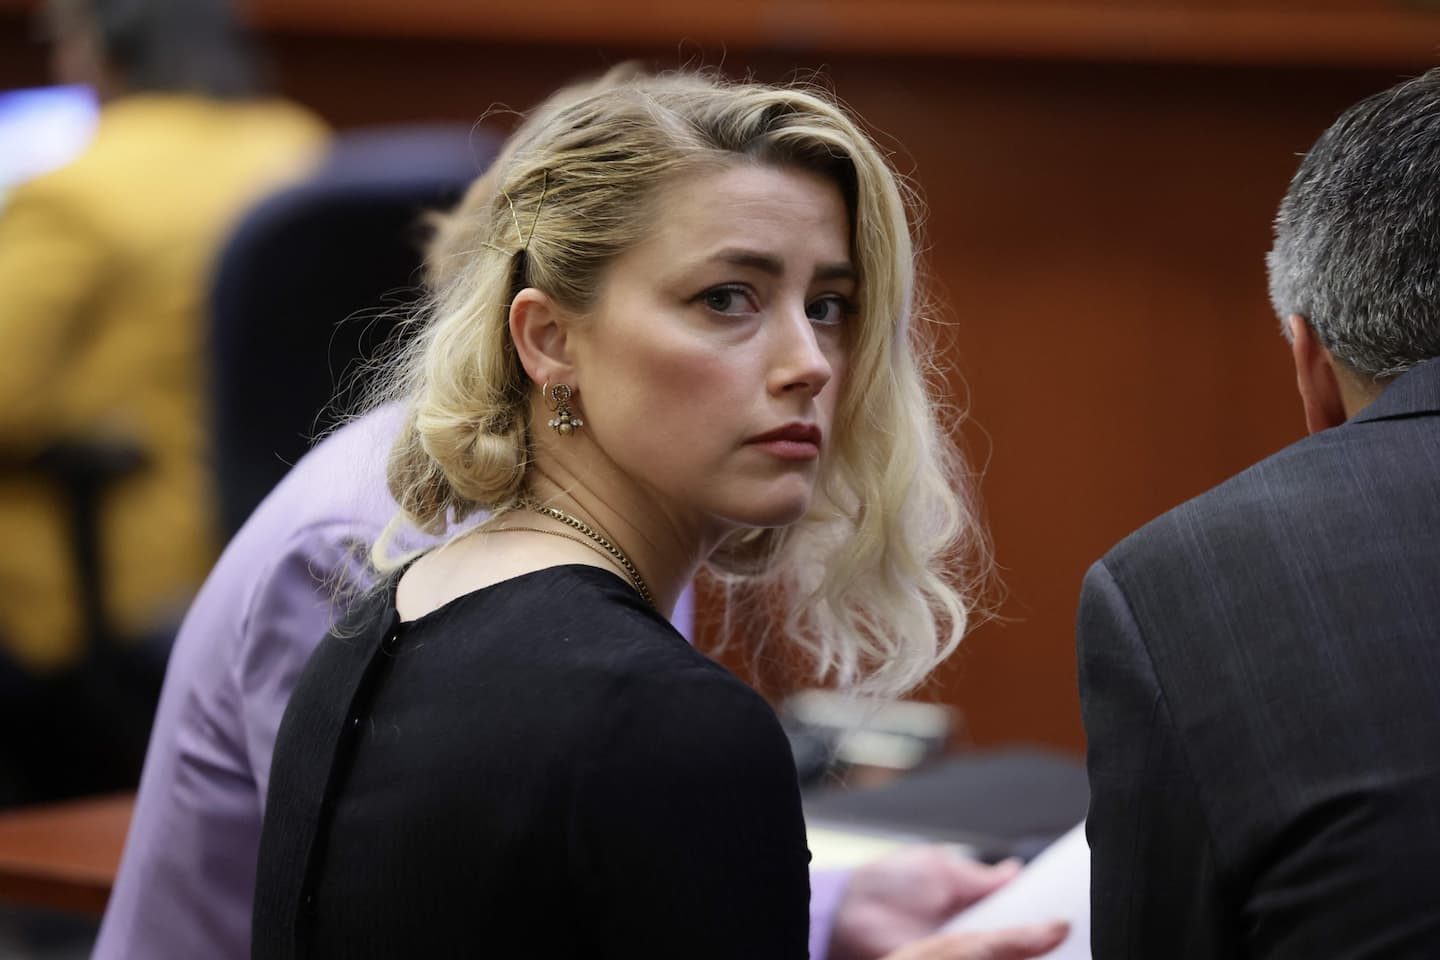 Here's why Amber Heard was sentenced more heavily than Johnny Depp